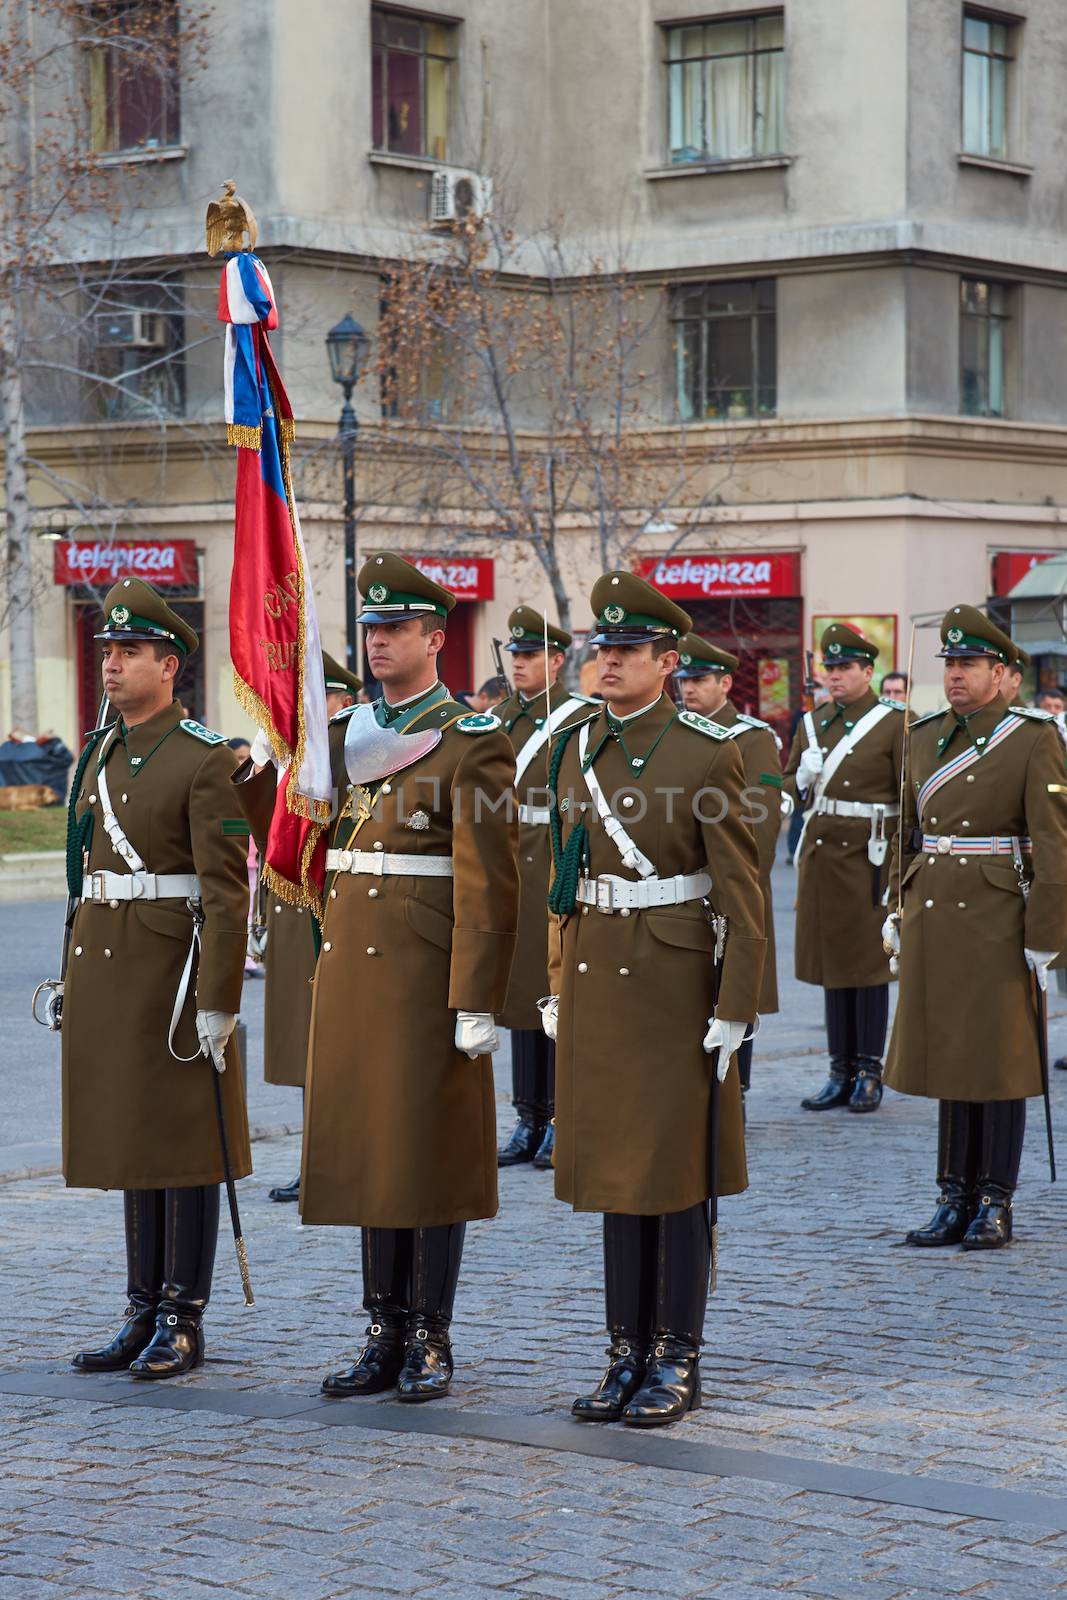 Members of the Carabineros parading as part of the changing of the guard ceremony at La Moneda in Santiago, Chile